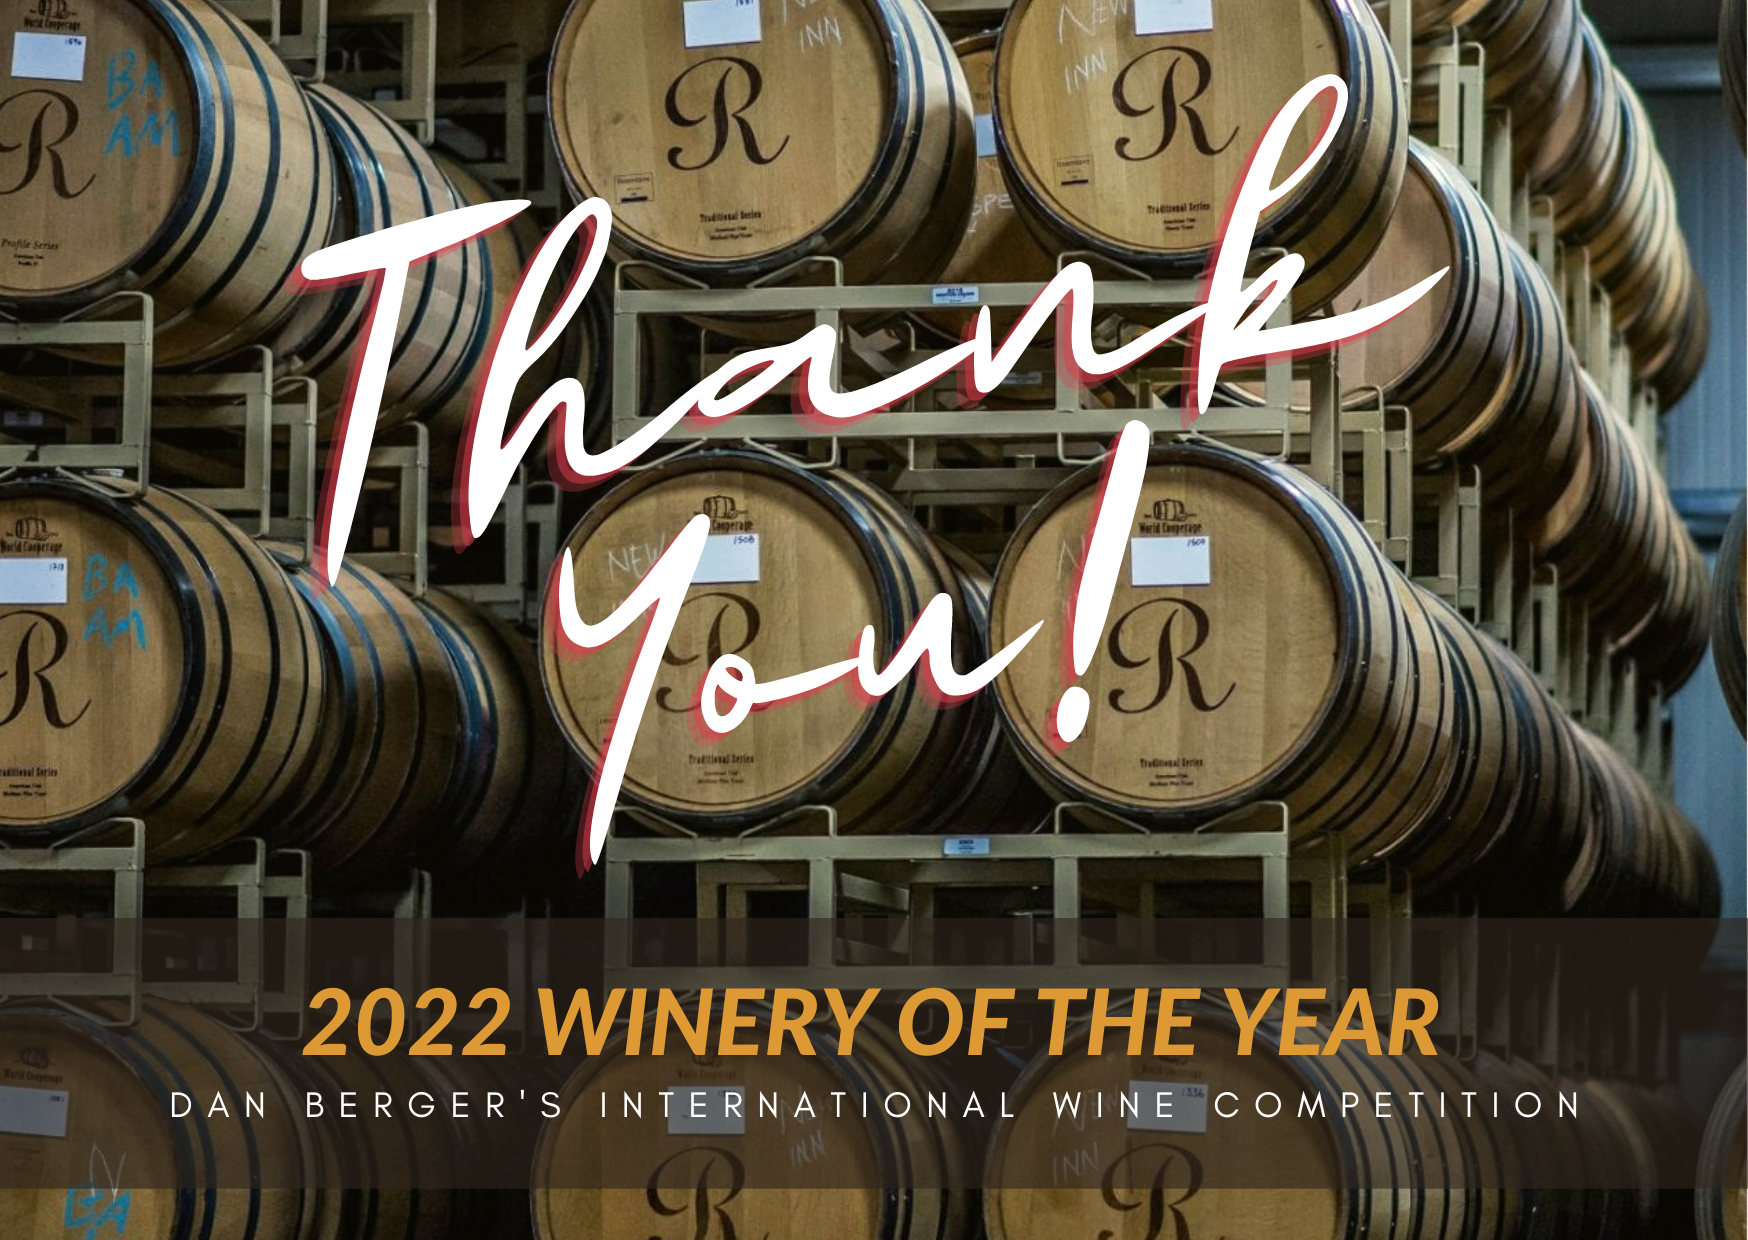 2022 WINERY OF THE YEAR